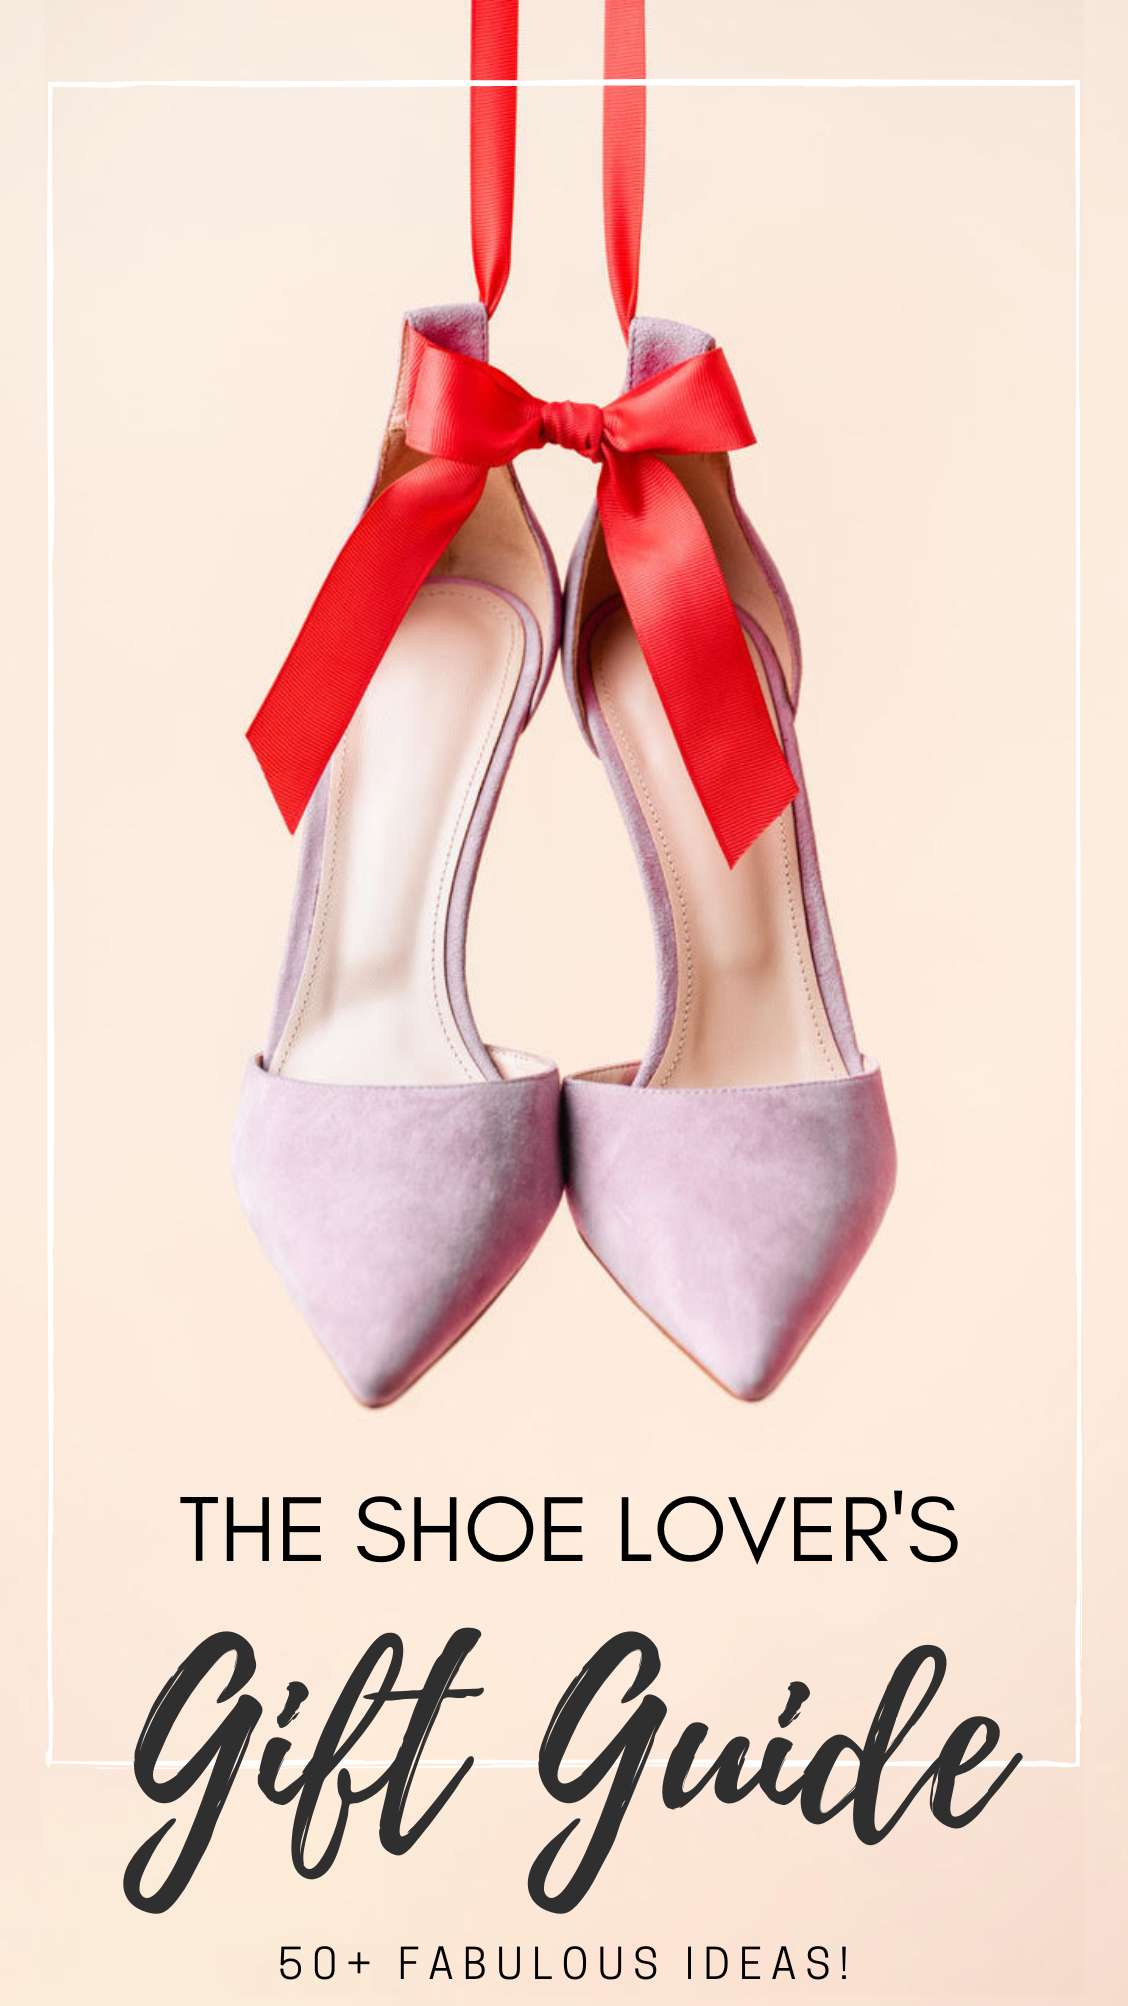 Text reading the shoe lovers gift 50+ fabulous ideas over close up of a red suede high heel resting on a red